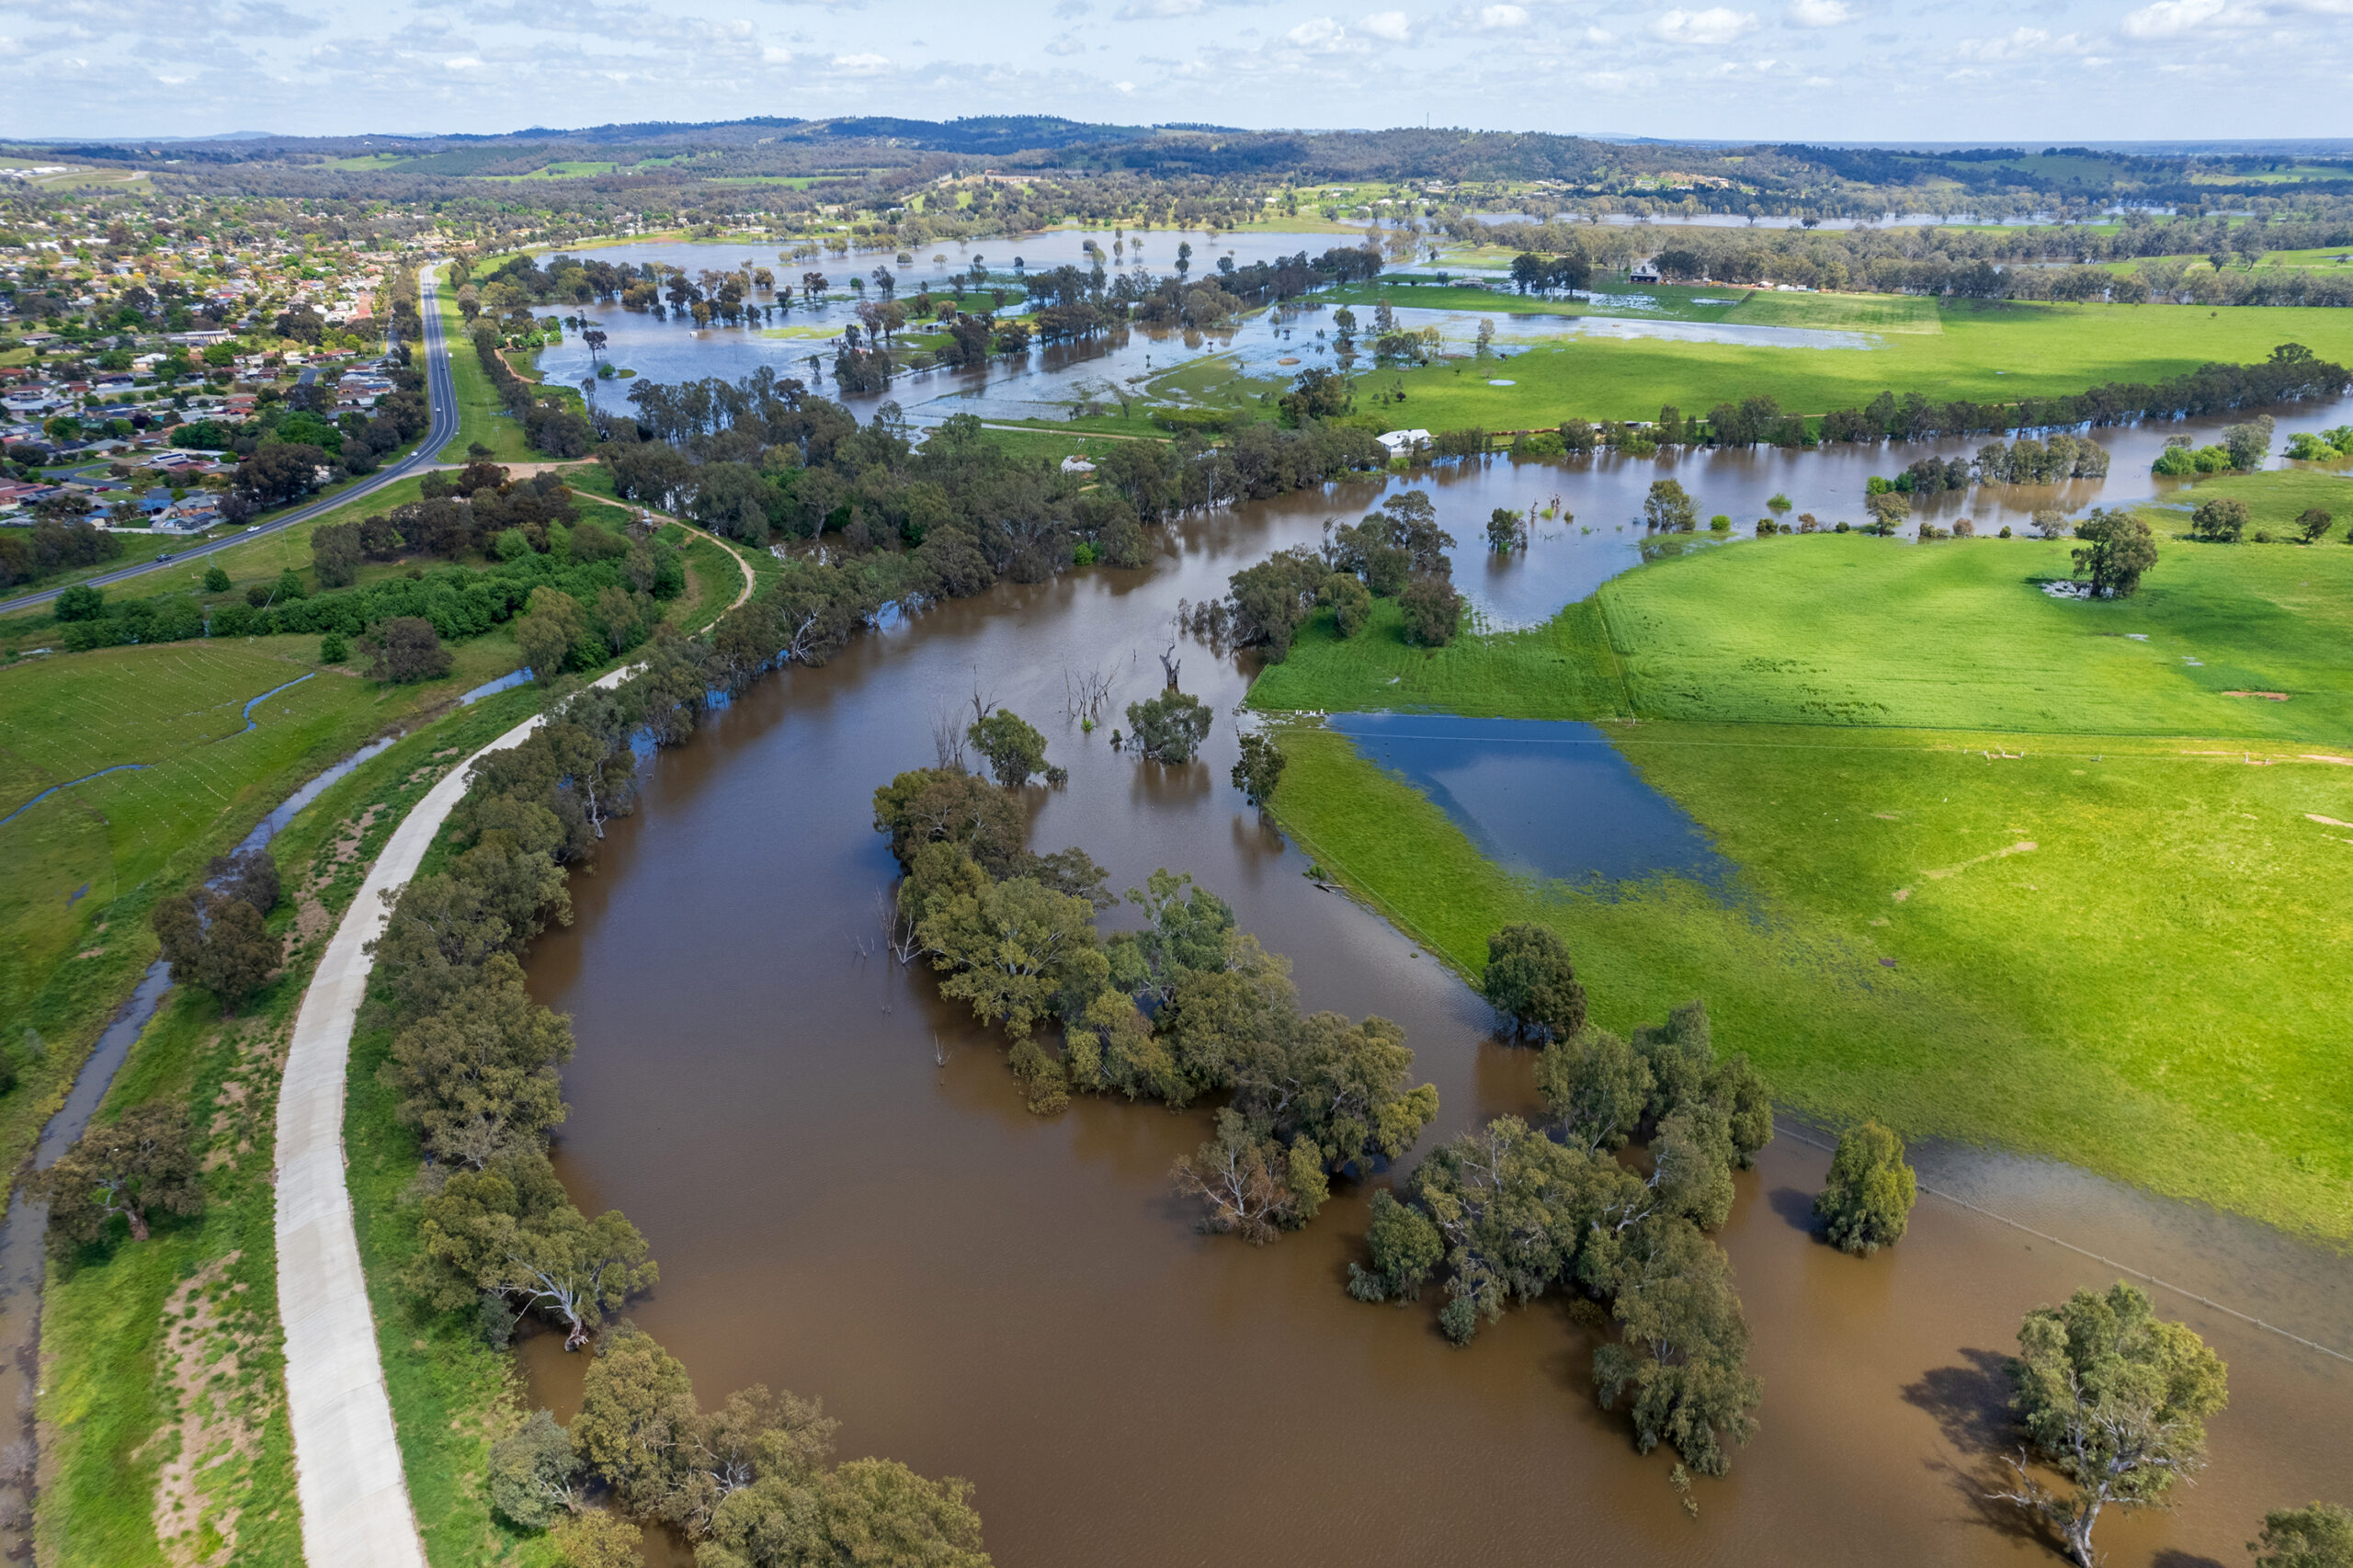 Aerial view of flooding of low-lying areas in Moorong, Wagga Wagga, New South Wales, Australia on 15 October 2022. Photo: Robert Myers / Wikimedia Commons